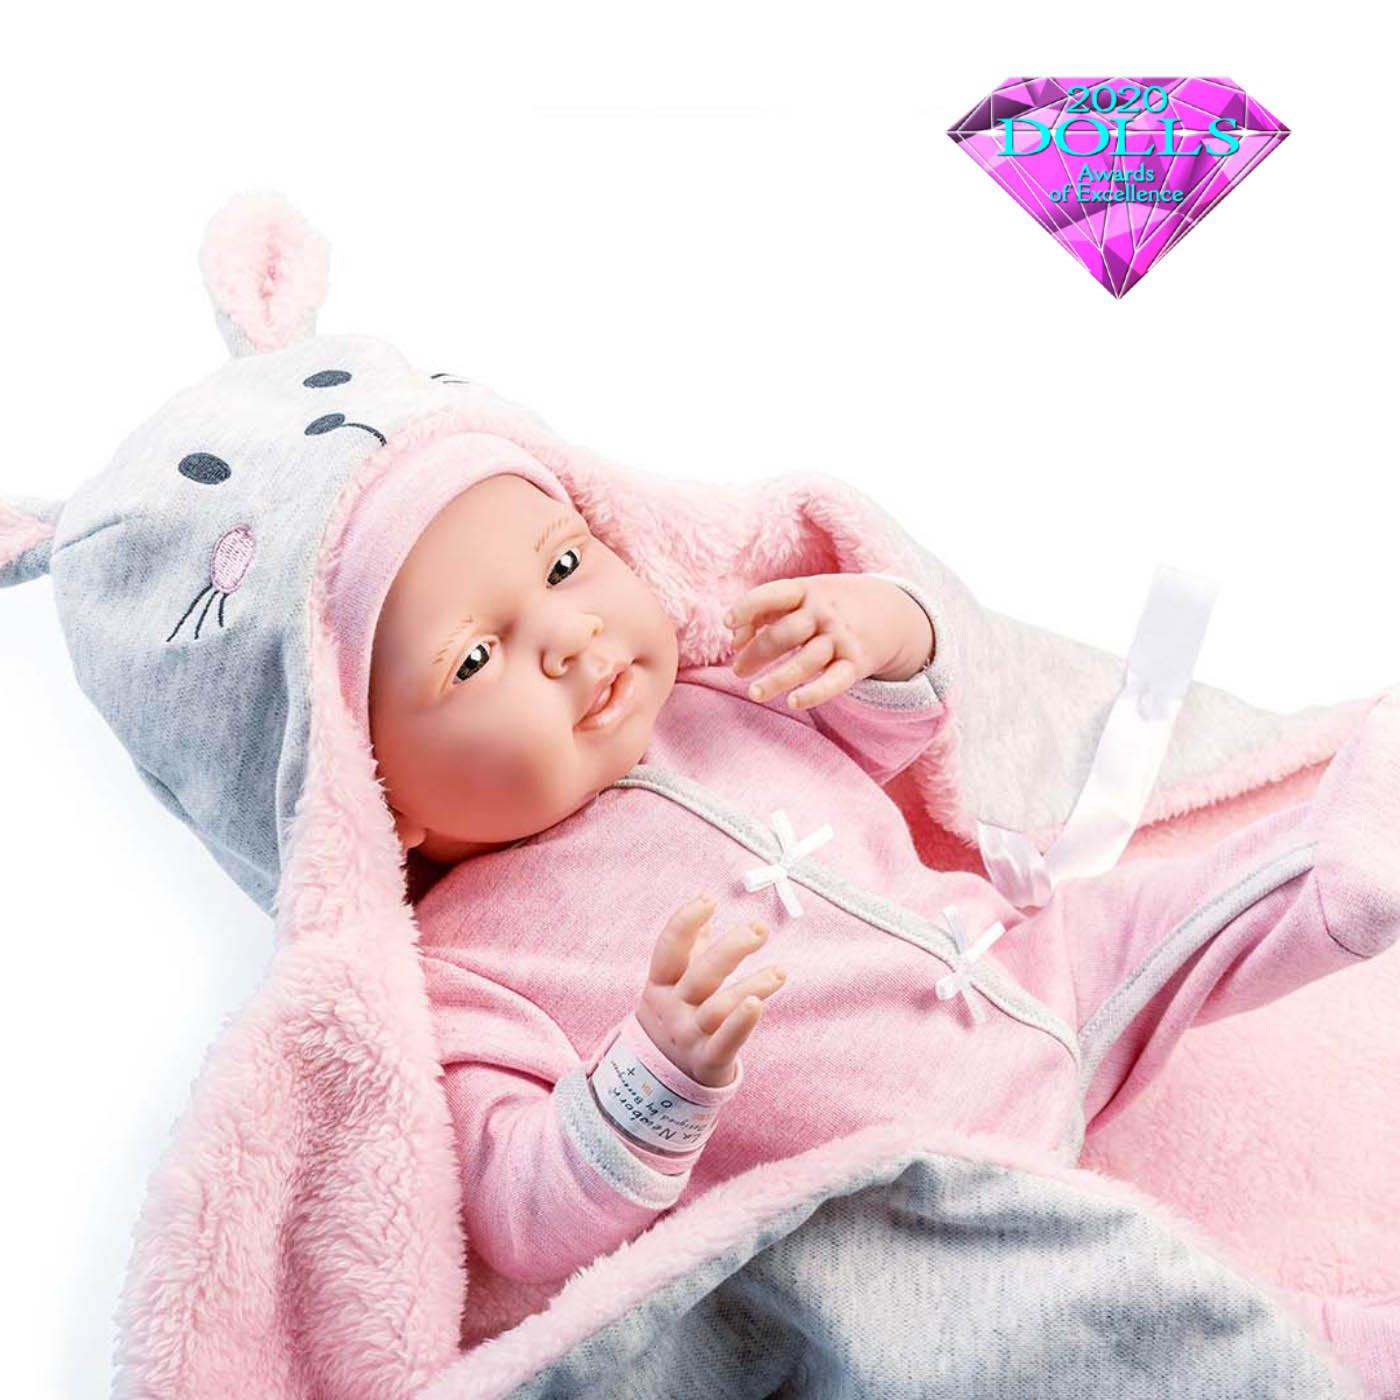 JC Toys, Soft Body La Newborn 15.5 inches baby doll -Pink Bunny Bunting Gift Set - JC Toys Group Inc.